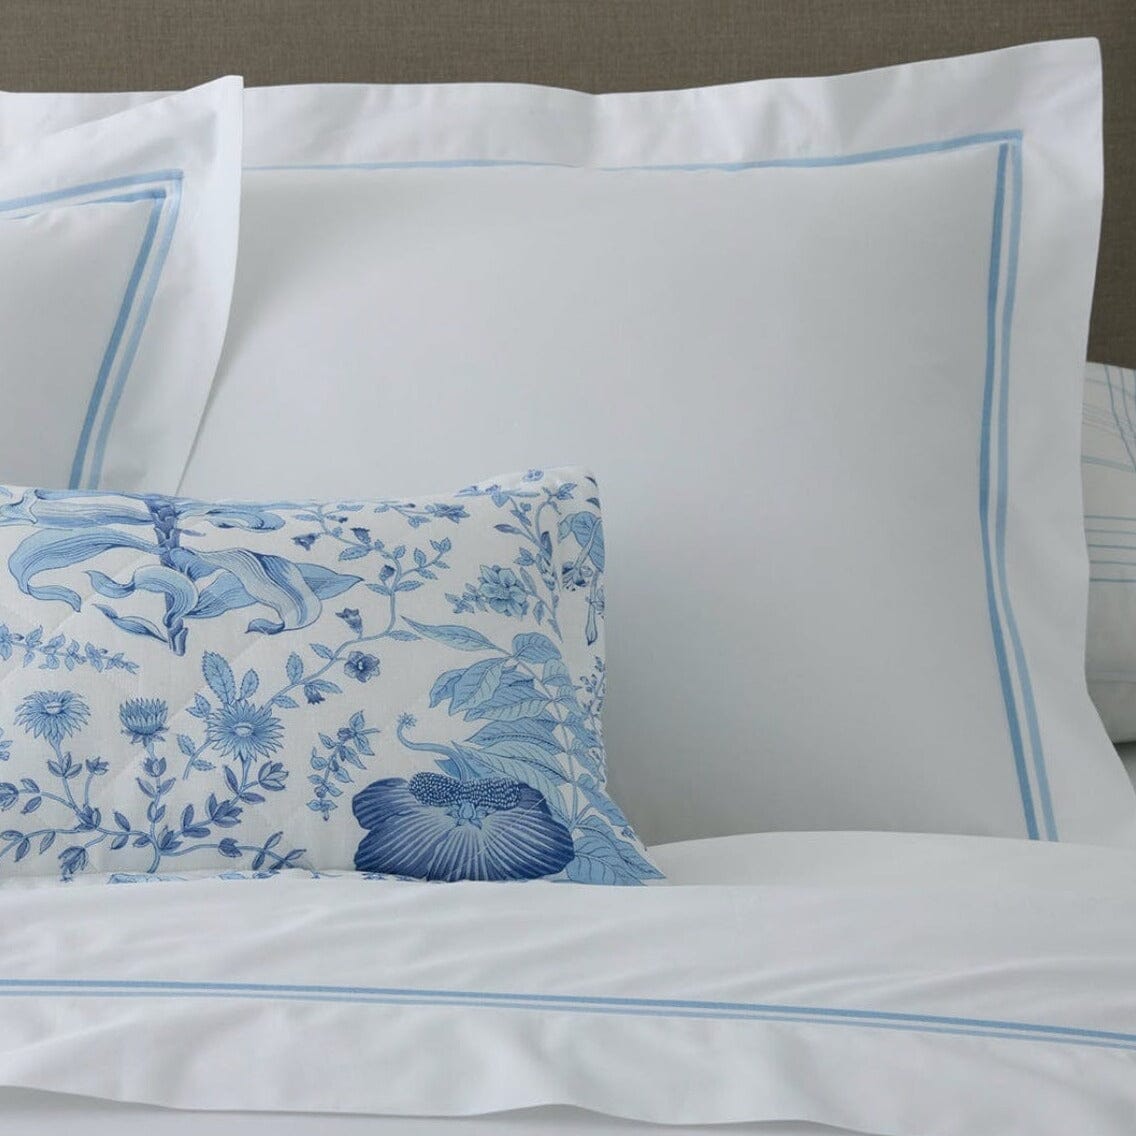 Matouk Bedding - Detail of Light Blue Essex Cotton shown with Pomegranate Linen Pattern in Blue